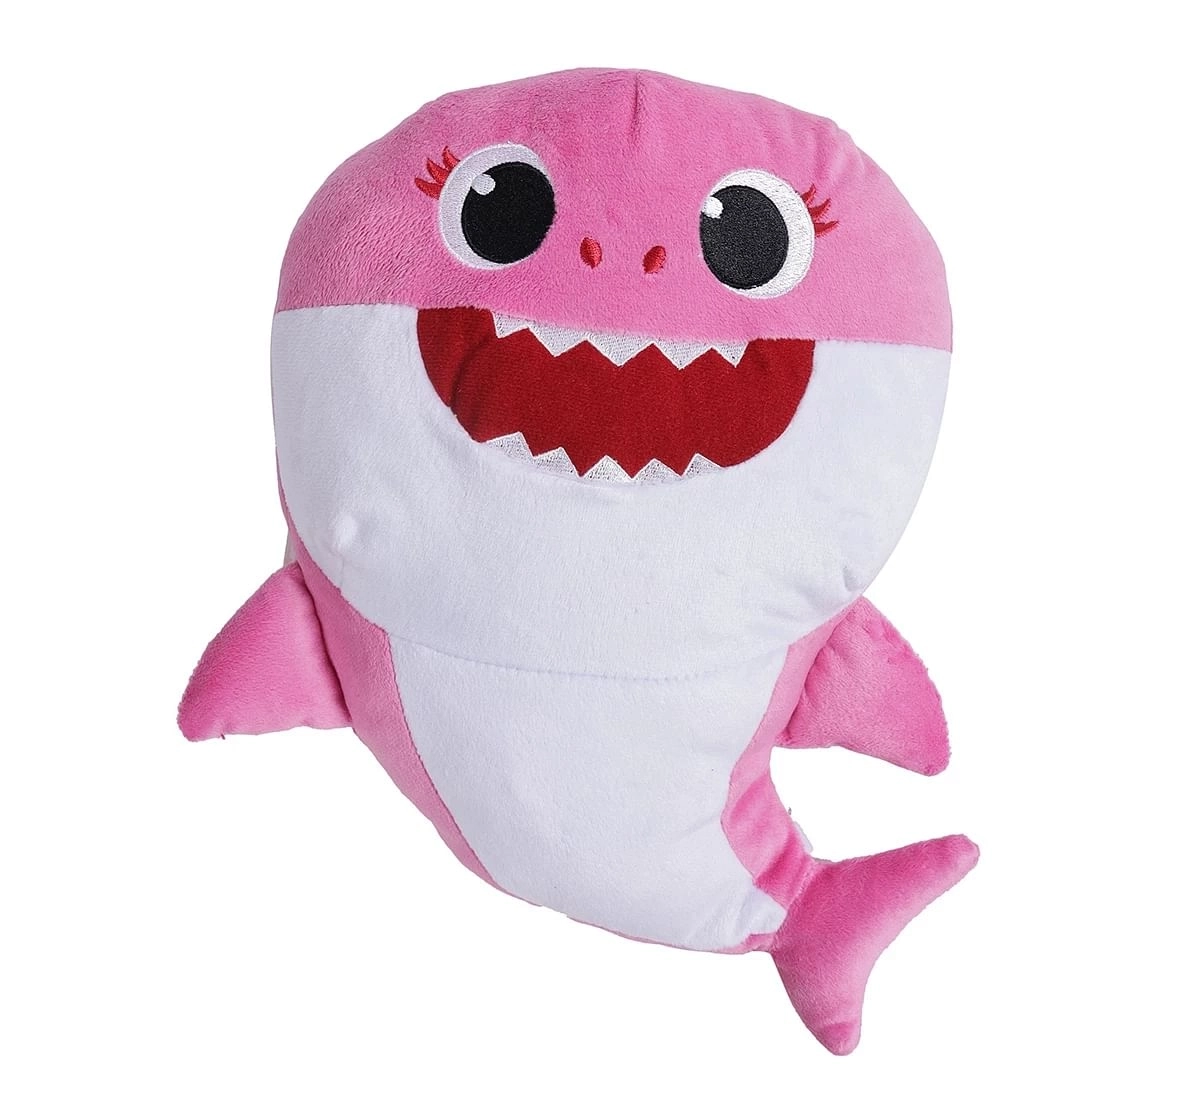 Baby Shark Plush Singing Plush Toy 8 Inch Mommy Shark for 1 Year and Above